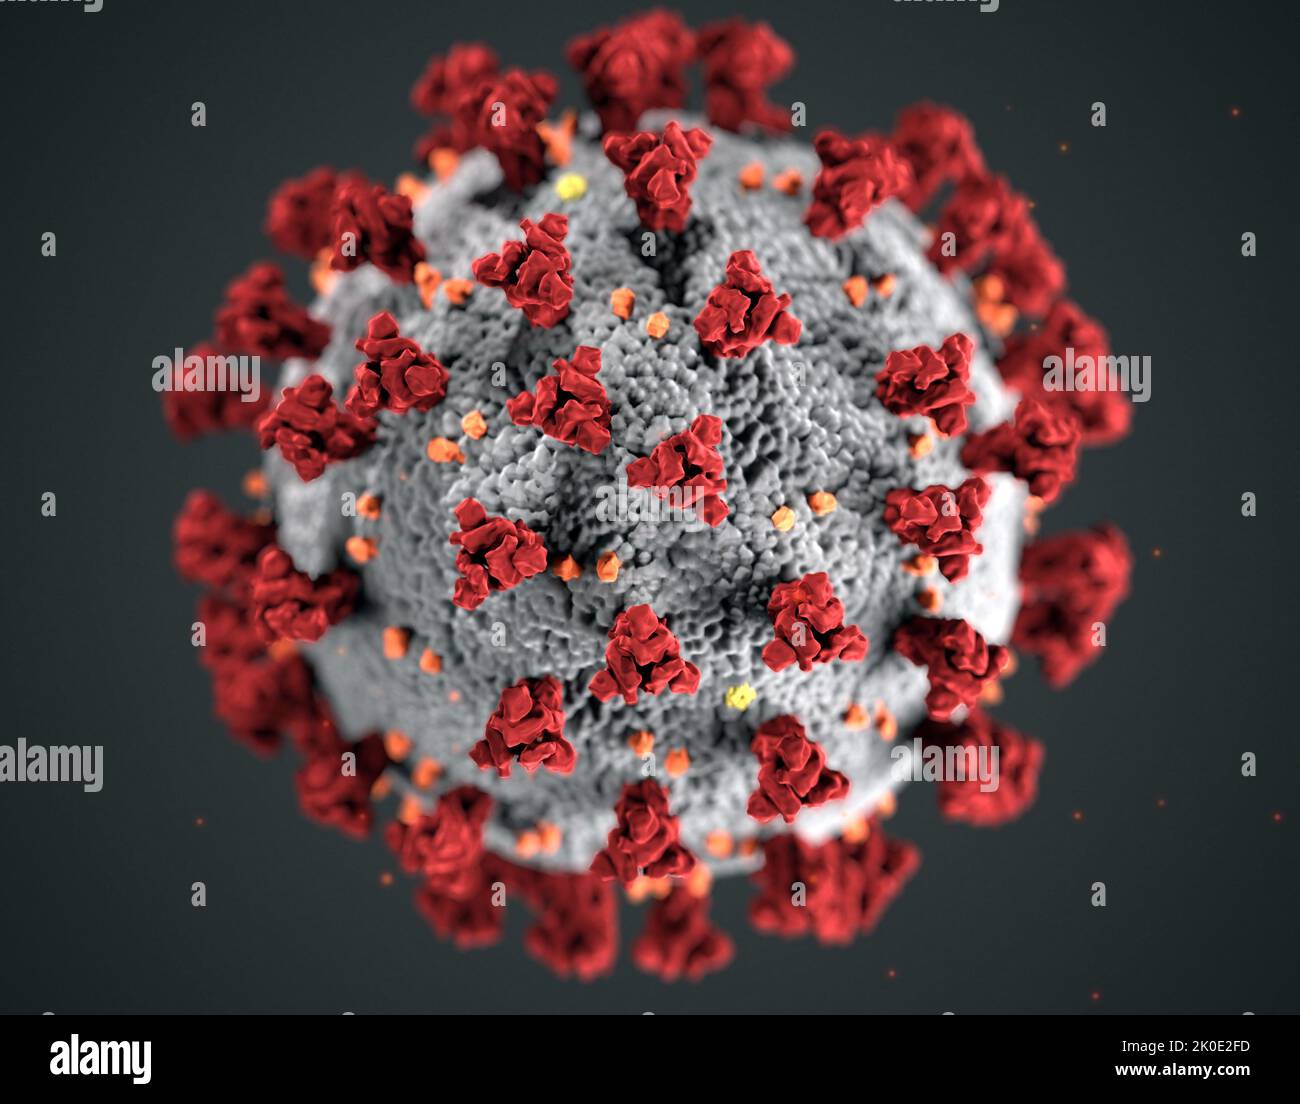 Illustration, created at the Centers for Disease Control and Prevention (CDC), of ultrastructural morphology exhibited by coronaviruses. A novel coronavirus, named Severe Acute Respiratory Syndrome coronavirus 2 (SARS-CoV-2), was identified as the cause of an outbreak of respiratory illness first detected in Wuhan, China in 2019. The illness caused by this virus has been named coronavirus disease 2019 (COVID-19). Stock Photo